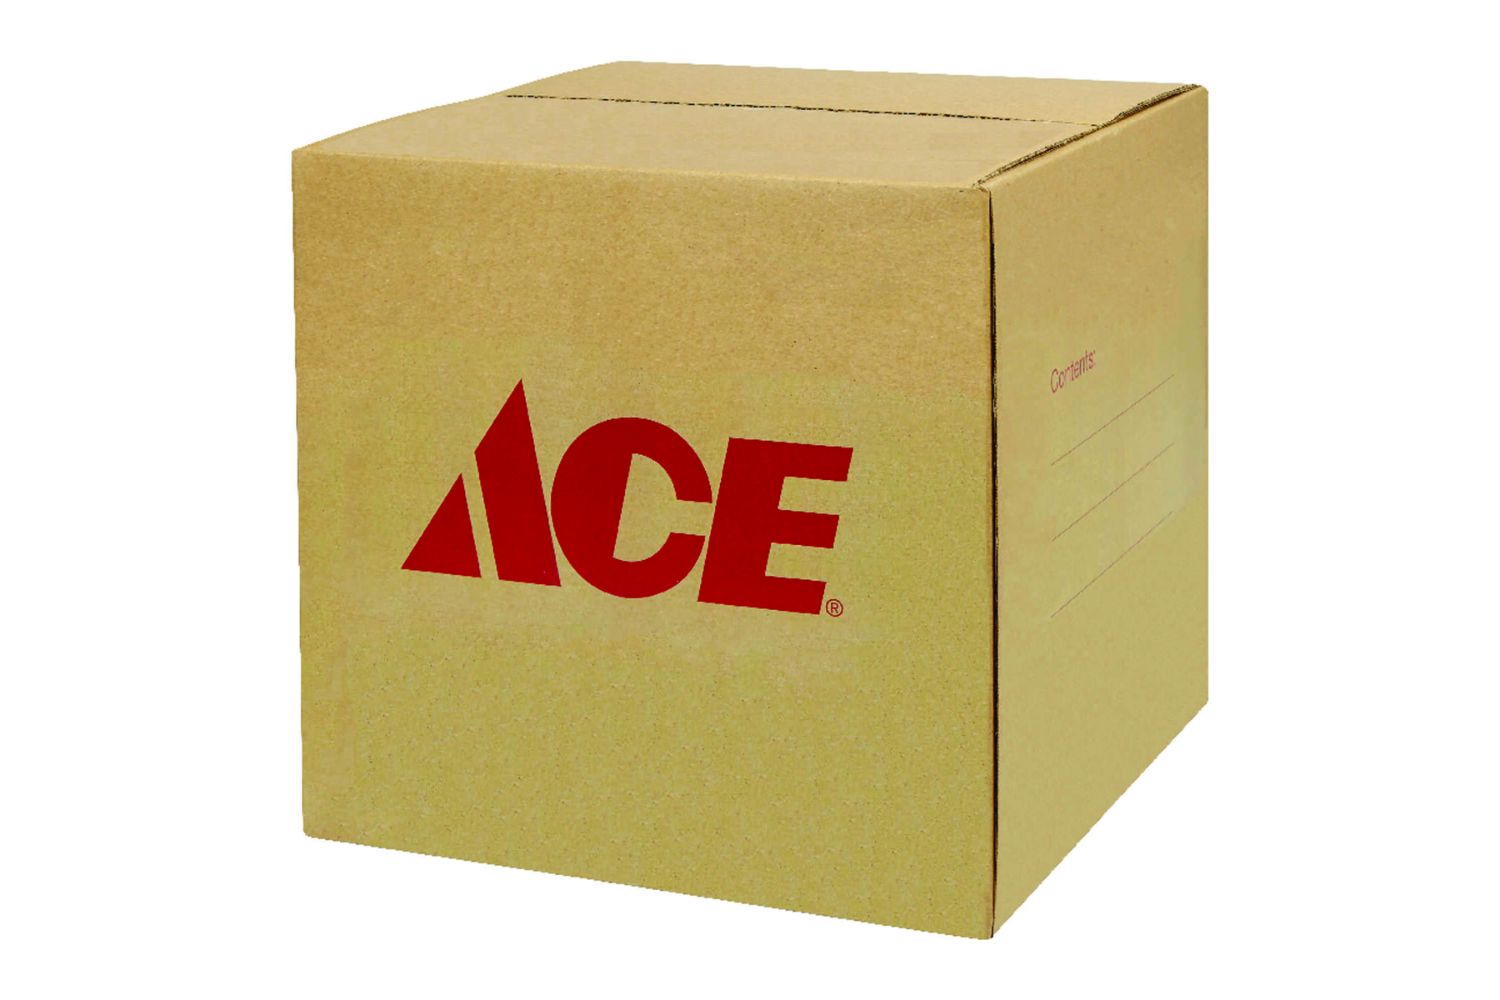 The Best Places to Buy Moving Boxes Option: Ace Hardware